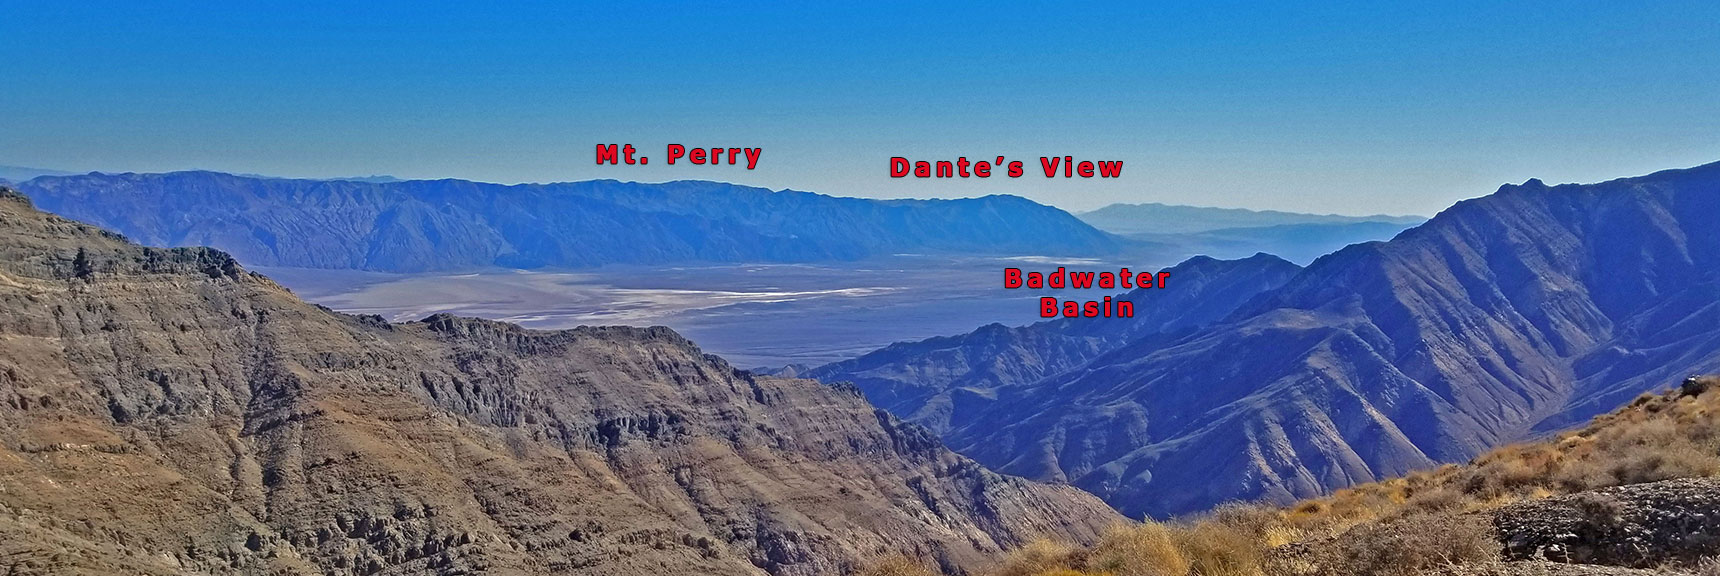 Southeastern View: Mt. Perry, Dante's View, Badwater Basin | Aguereberry Point | Panamint Mountain Range | Death Valley National Park, California